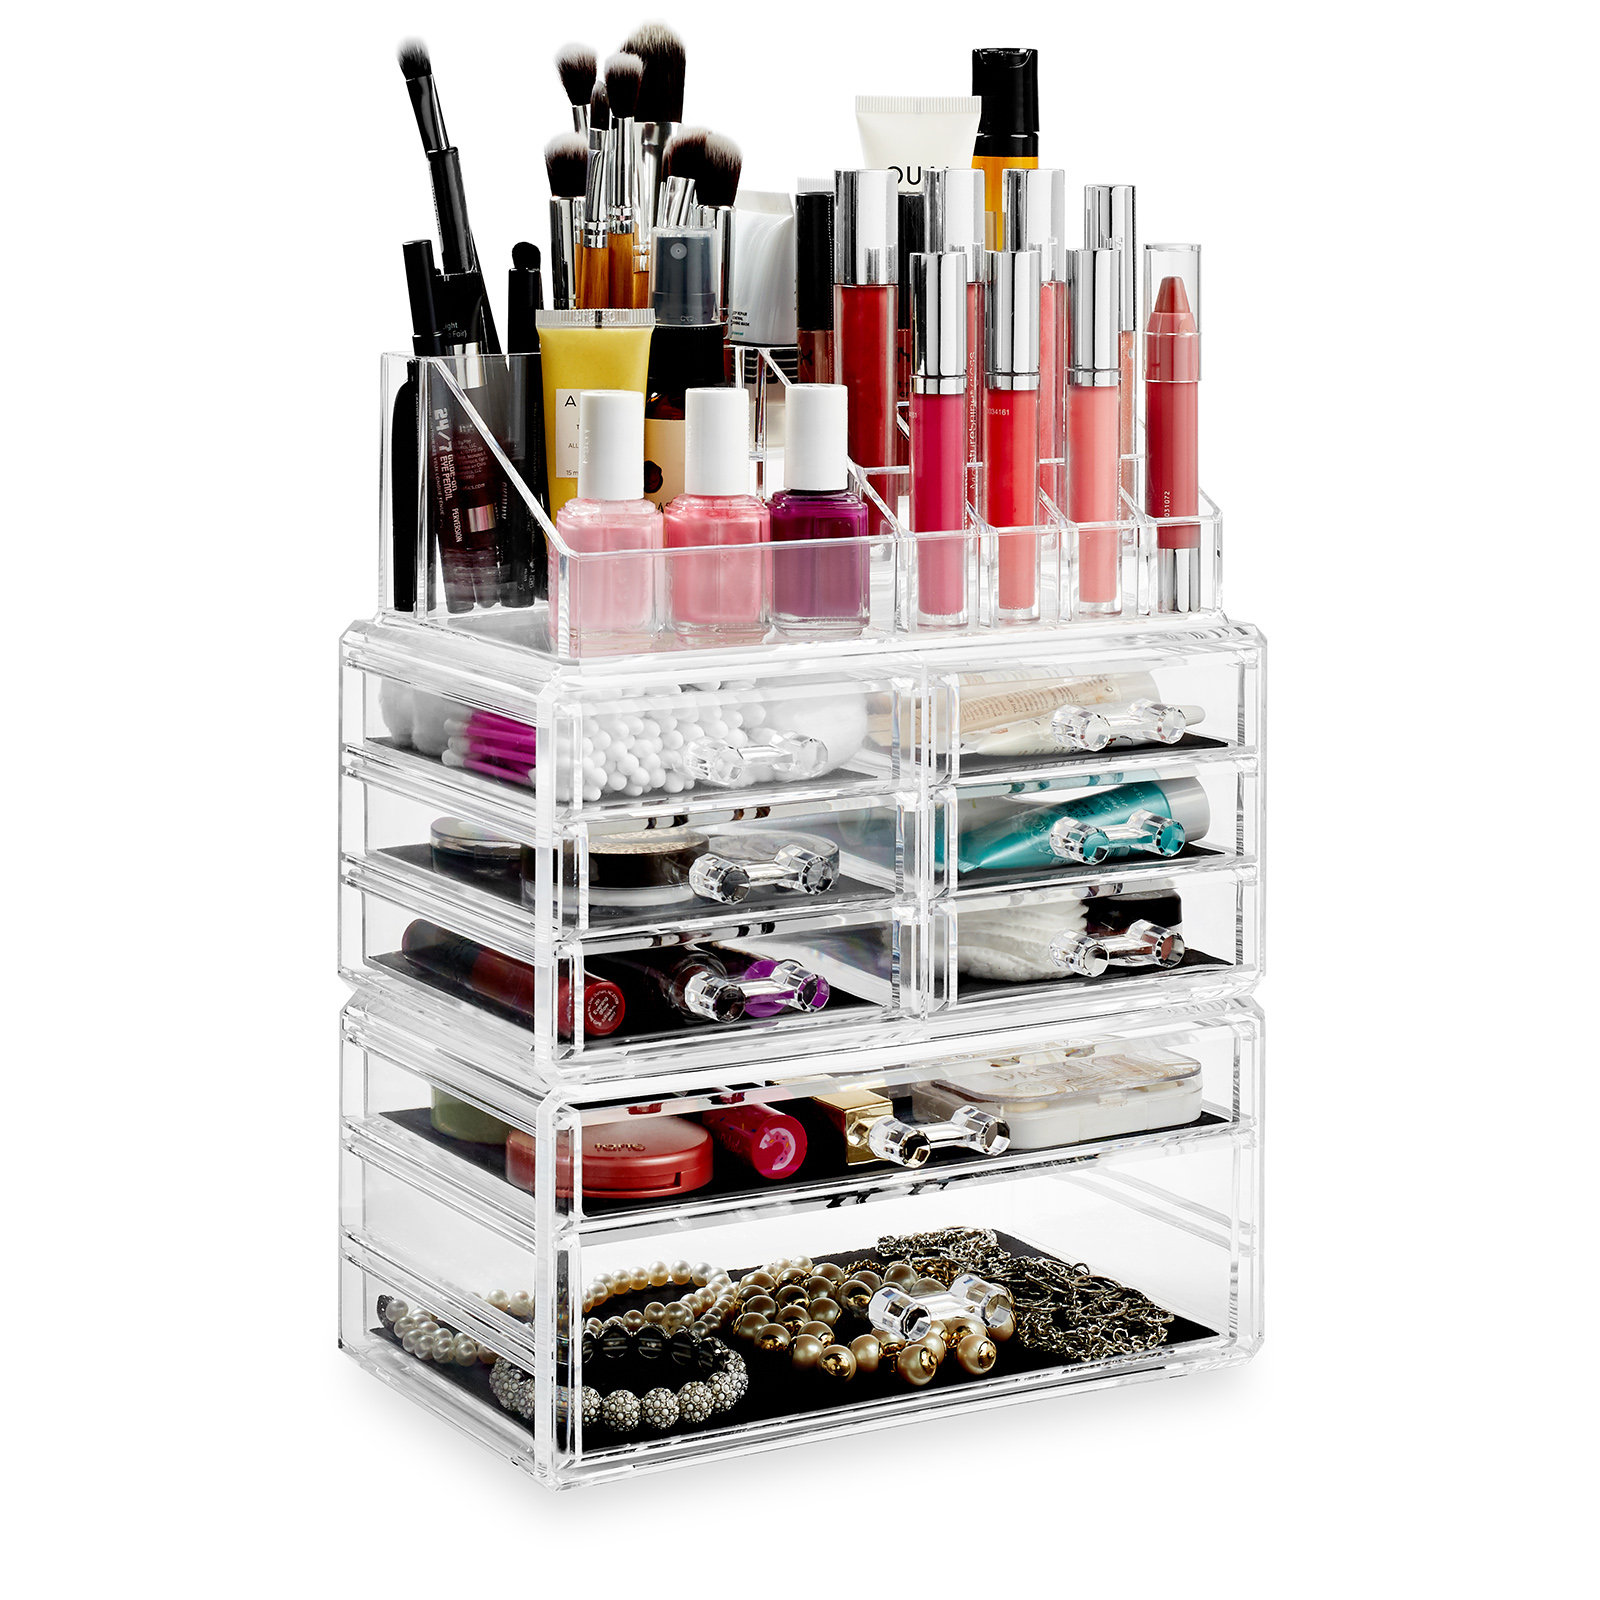 Cate Acrylic 16 Compartment Makeup Organizer